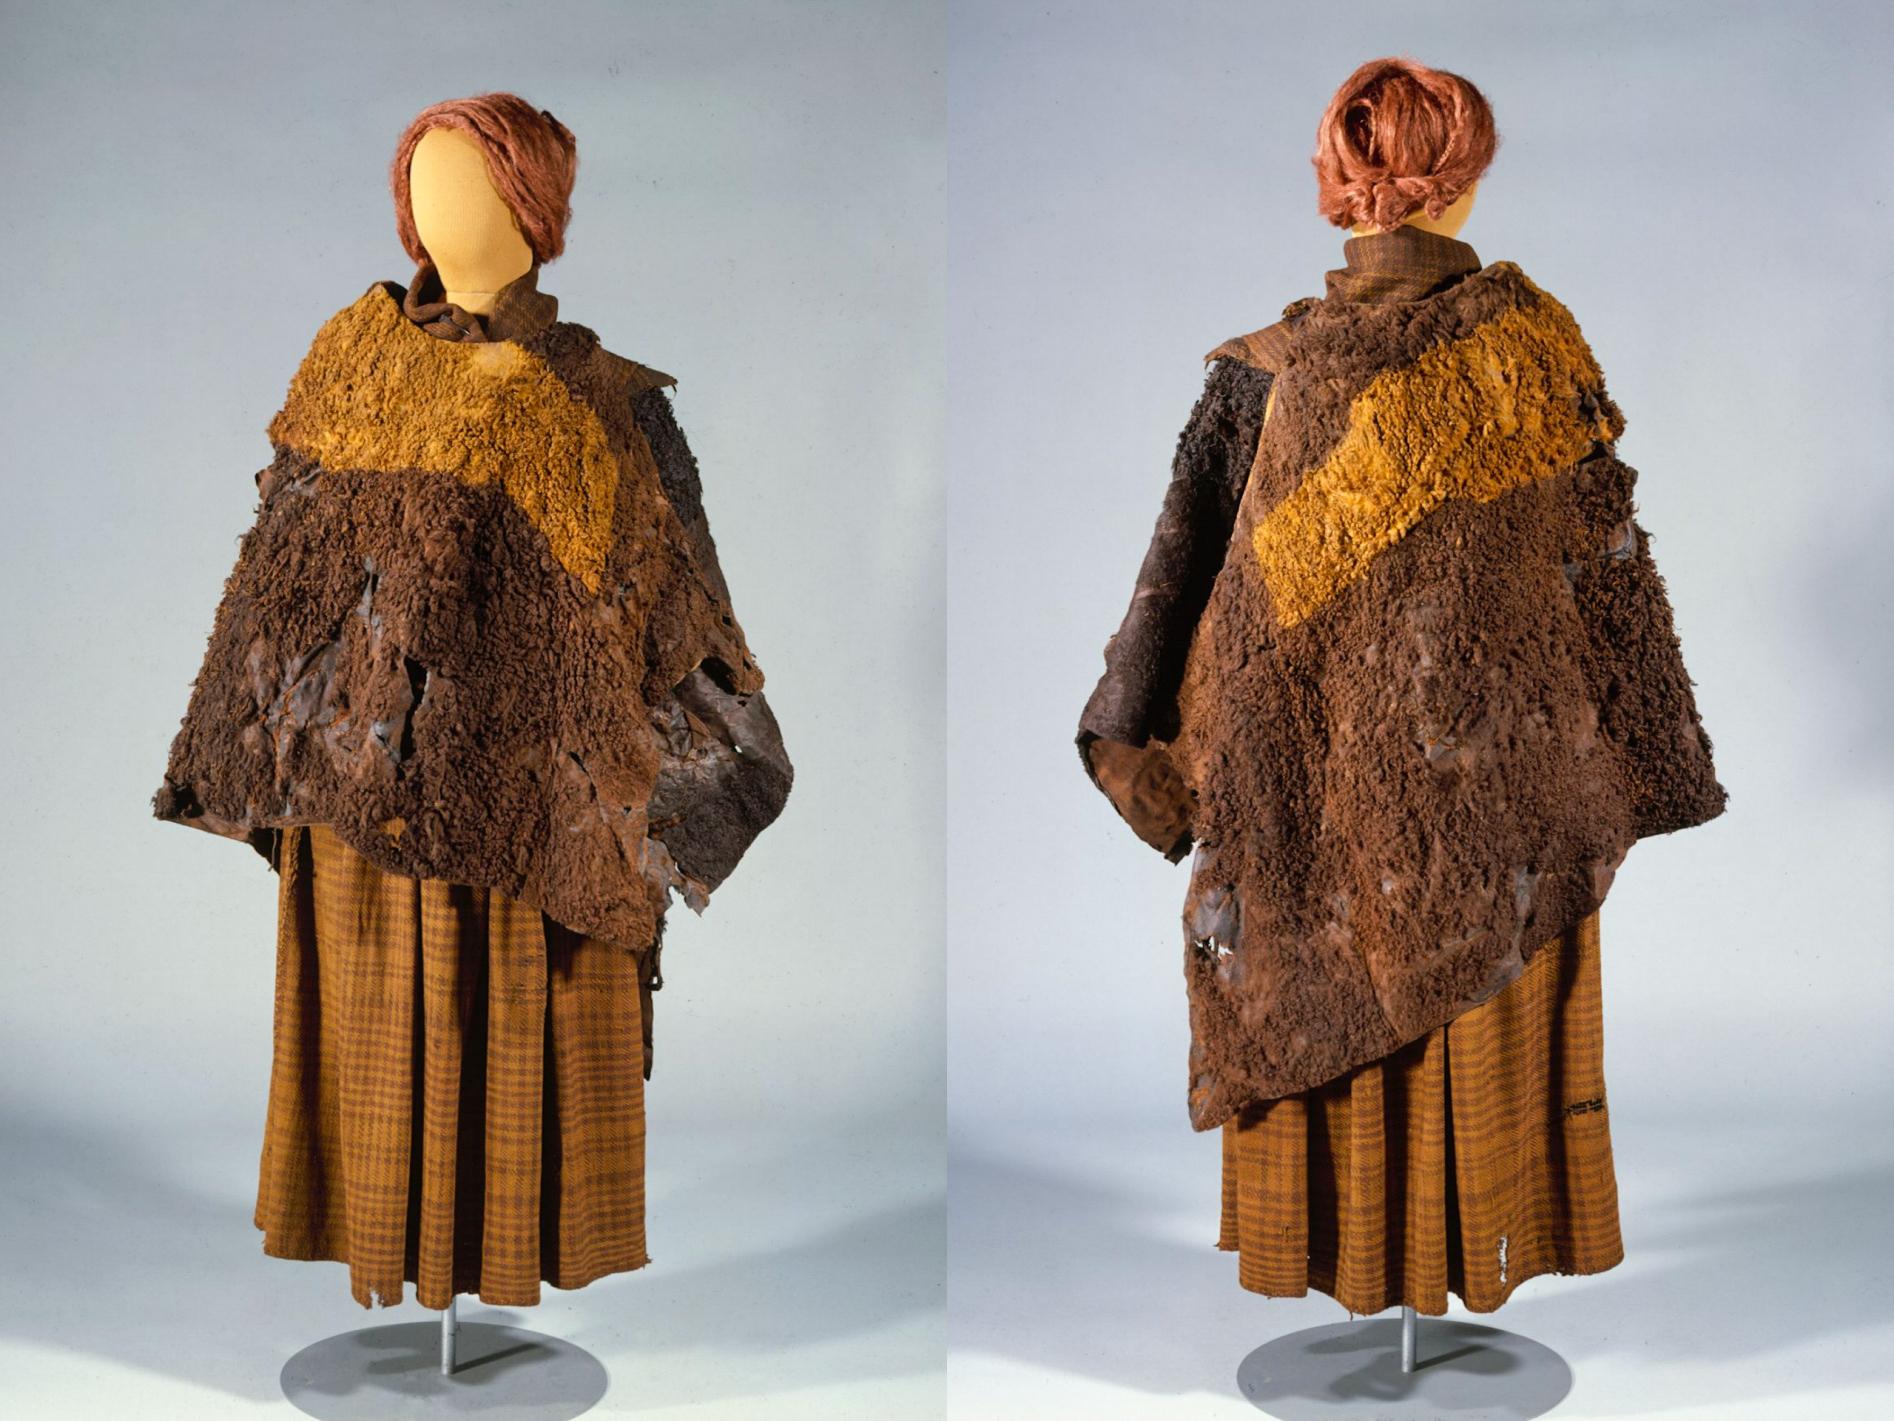 The clothing of the bog-corpse Huldremose woman from the 2nd century BC consisting of 2 fur cloaks, a shawl and a skirt.